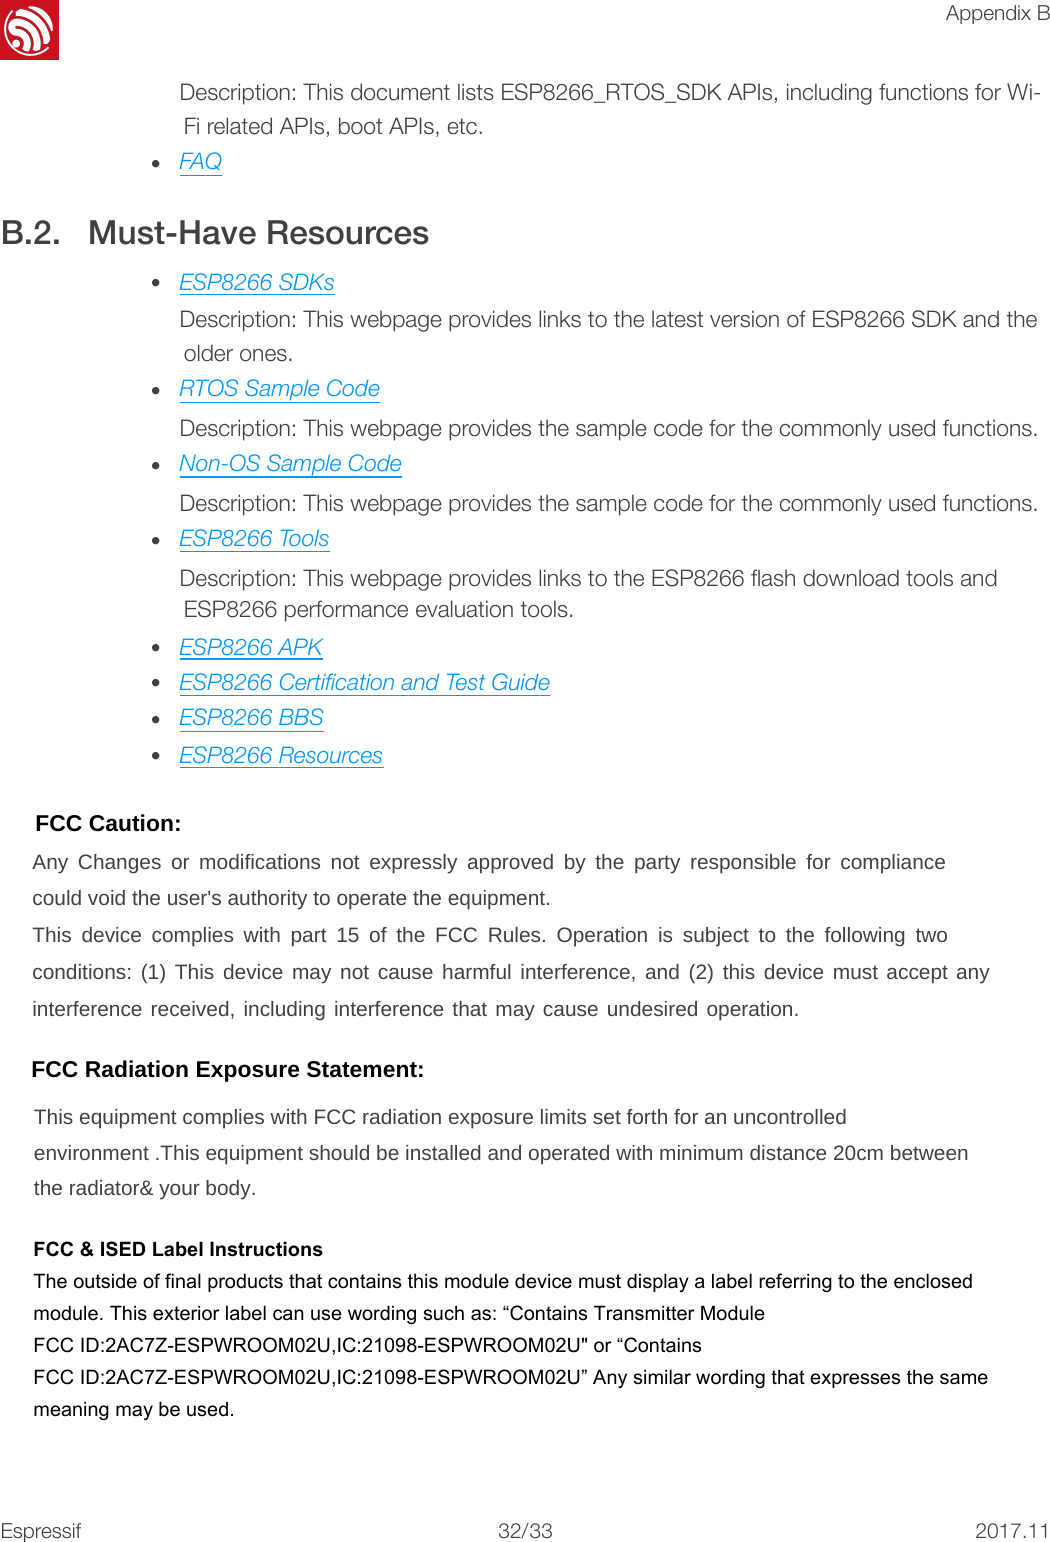 !Appendix BDescription: This document lists ESP8266_RTOS_SDK APIs, including functions for Wi-Fi related APIs, boot APIs, etc. •FAQB.2. Must-Have Resources •ESP8266 SDKsDescription: This webpage provides links to the latest version of ESP8266 SDK and theolder ones.•RTOS Sample CodeDescription: This webpage provides the sample code for the commonly used functions.•Non-OS Sample CodeDescription: This webpage provides the sample code for the commonly used functions.•ESP8266 ToolsDescription: This webpage provides links to the ESP8266 ﬂash download tools andESP8266 performance evaluation tools.•ESP8266 APK•ESP8266 Certiﬁcation and Test Guide•ESP8266 BBS•ESP8266 Resources!Espressif!/!32 332017.11FCC Caution: Any Changes or modifications not expressly approved by the party responsible for compliance could void the user&apos;s authority to operate the equipment. This device complies with part 15 of the FCC Rules. Operation is subject to the following two conditions: (1) This device may not cause harmful interference, and (2) this device must accept any interference received, including interference that may cause undesired operation. FCC Radiation Exposure Statement: This equipment complies with FCC radiation exposure limits set forth for an uncontrolled environment .This equipment should be installed and operated with minimum distance 20cm between the radiator&amp; your body.   FCC &amp; ISED Label InstructionsThe outside of final products that contains this module device must display a label referring to the enclosed module. This exterior label can use wording such as: “Contains Transmitter ModuleFCC ID:2AC7Z-ESPWROOM02U,IC:21098-ESPWROOM02U&quot; or “Contains FCC ID:2AC7Z-ESPWROOM02U,IC:21098-ESPWROOM02U” Any similar wording that expresses the same meaning may be used. 